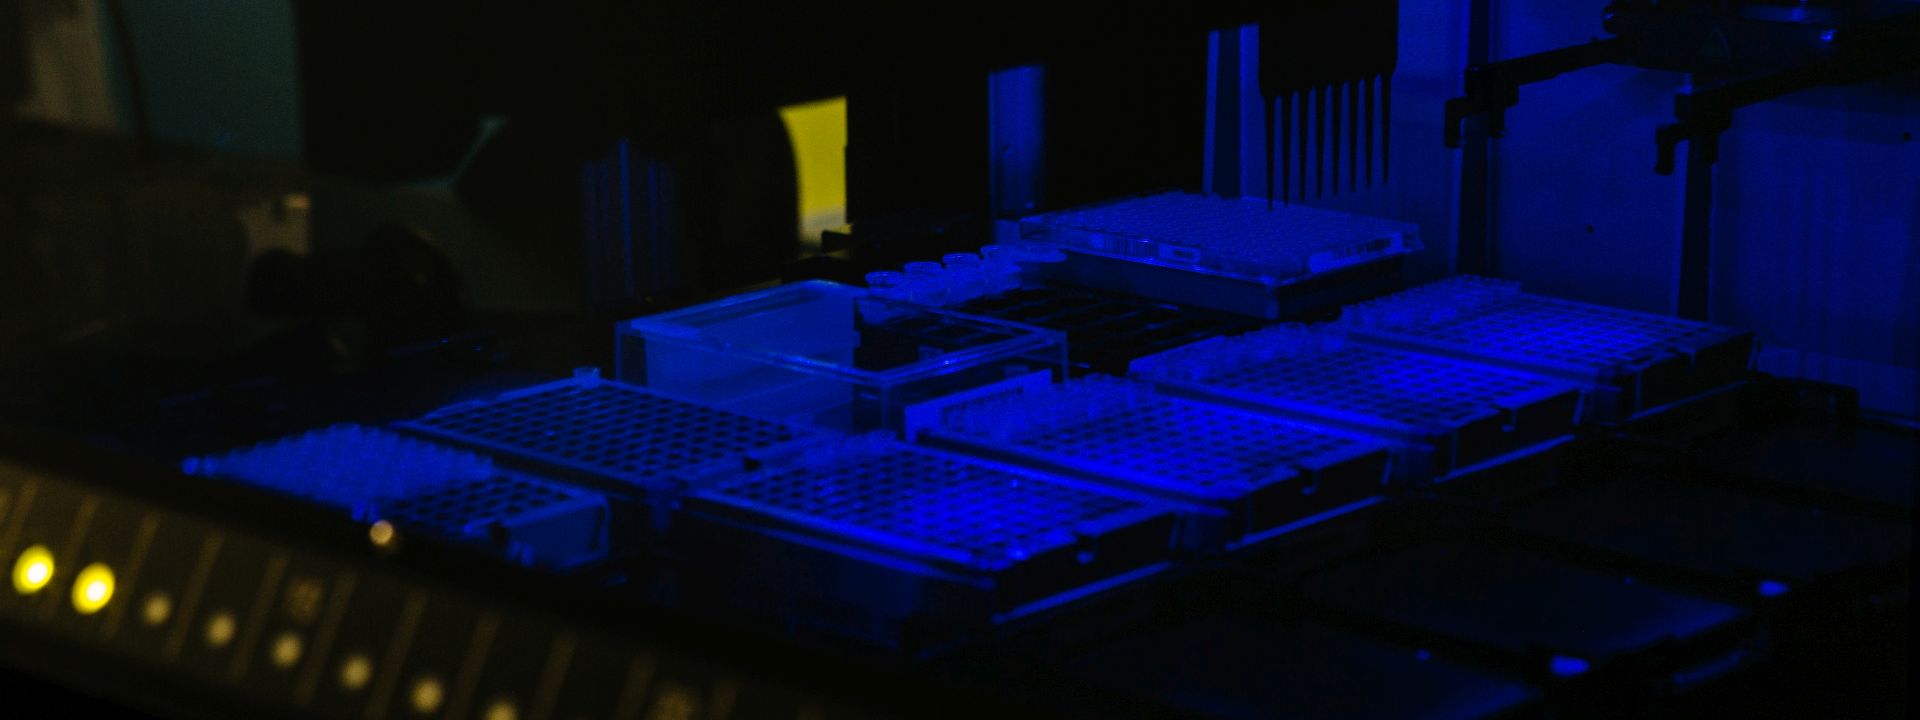 adaptive biotech image with rows of trays